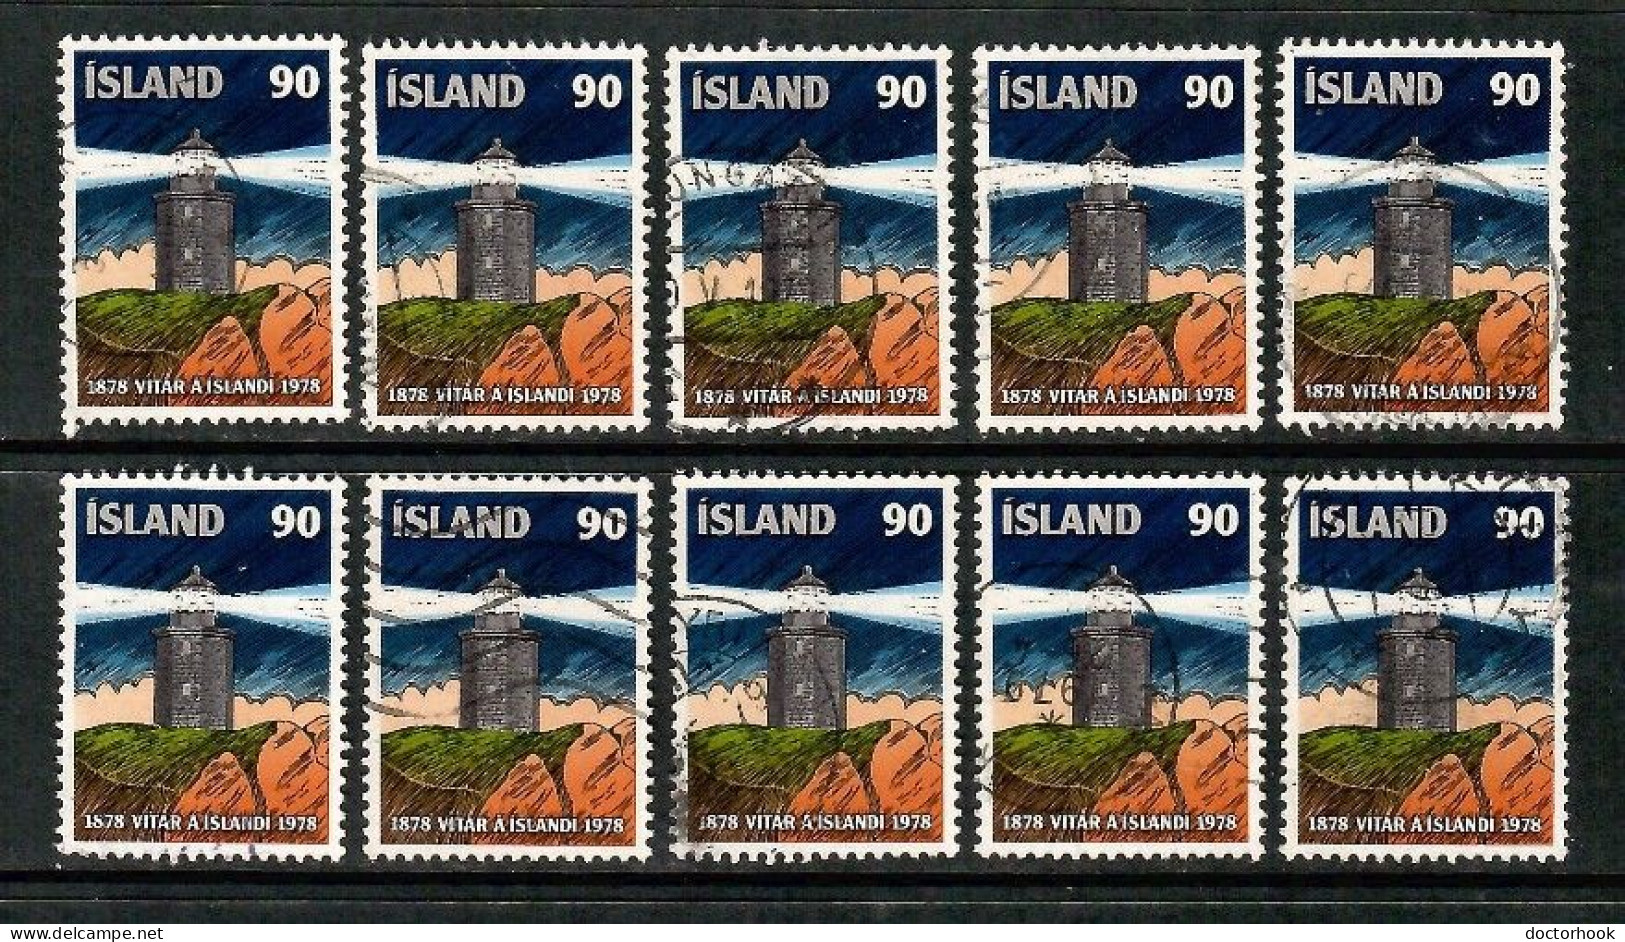 ICELAND   Scott # 574 USED WHOLESALE LOT OF 10 (CONDITION AS PER SCAN) (WH-626) - Colecciones & Series